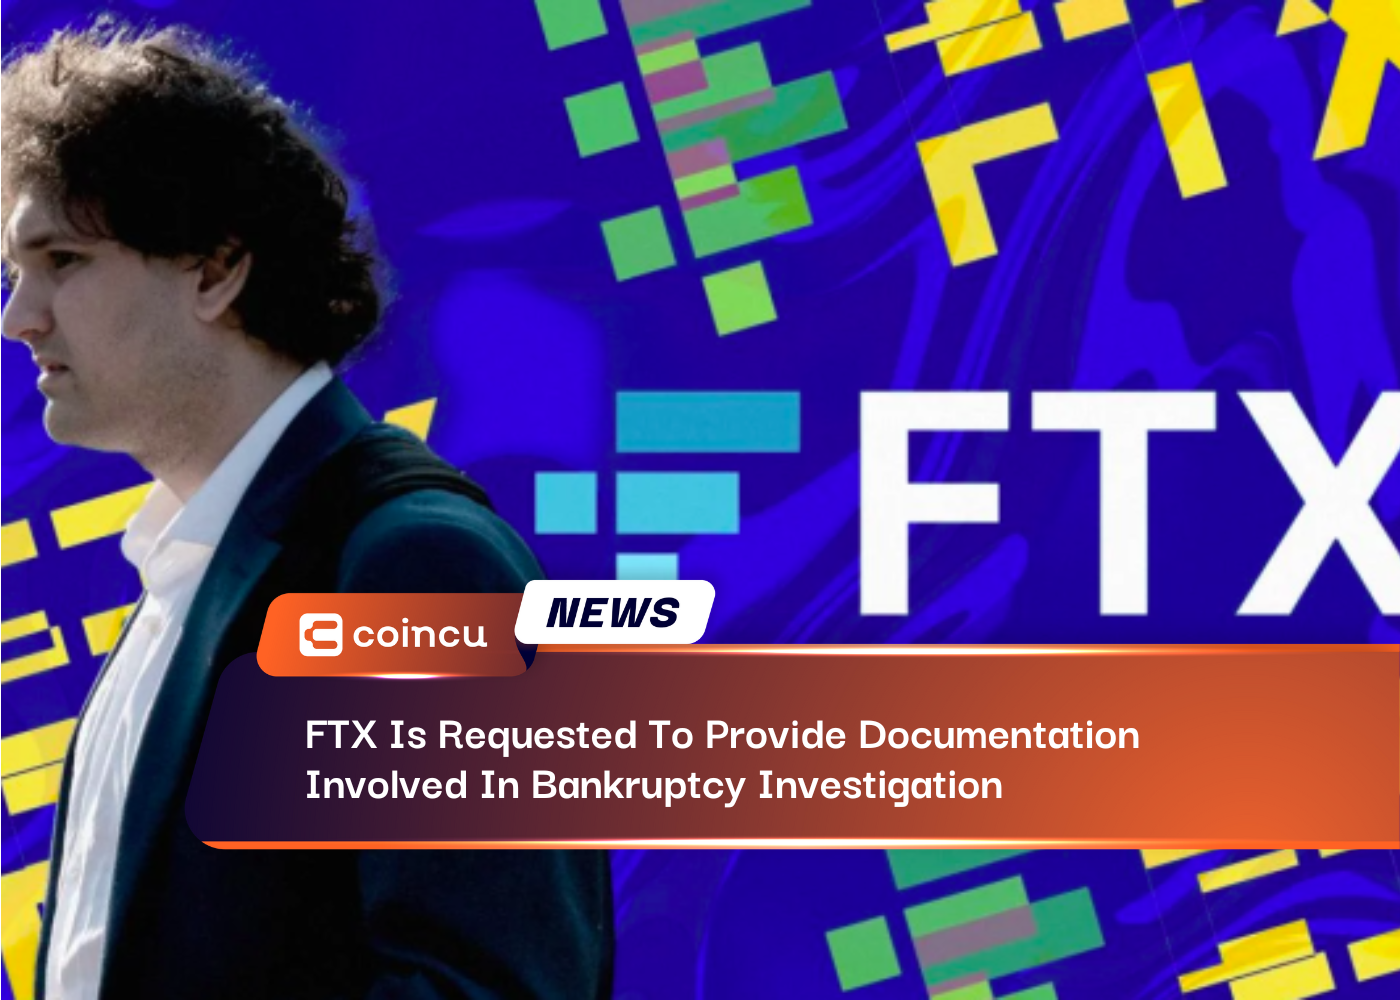 FTX Is Requested To Provide Documentation Involved In Bankruptcy Investigation